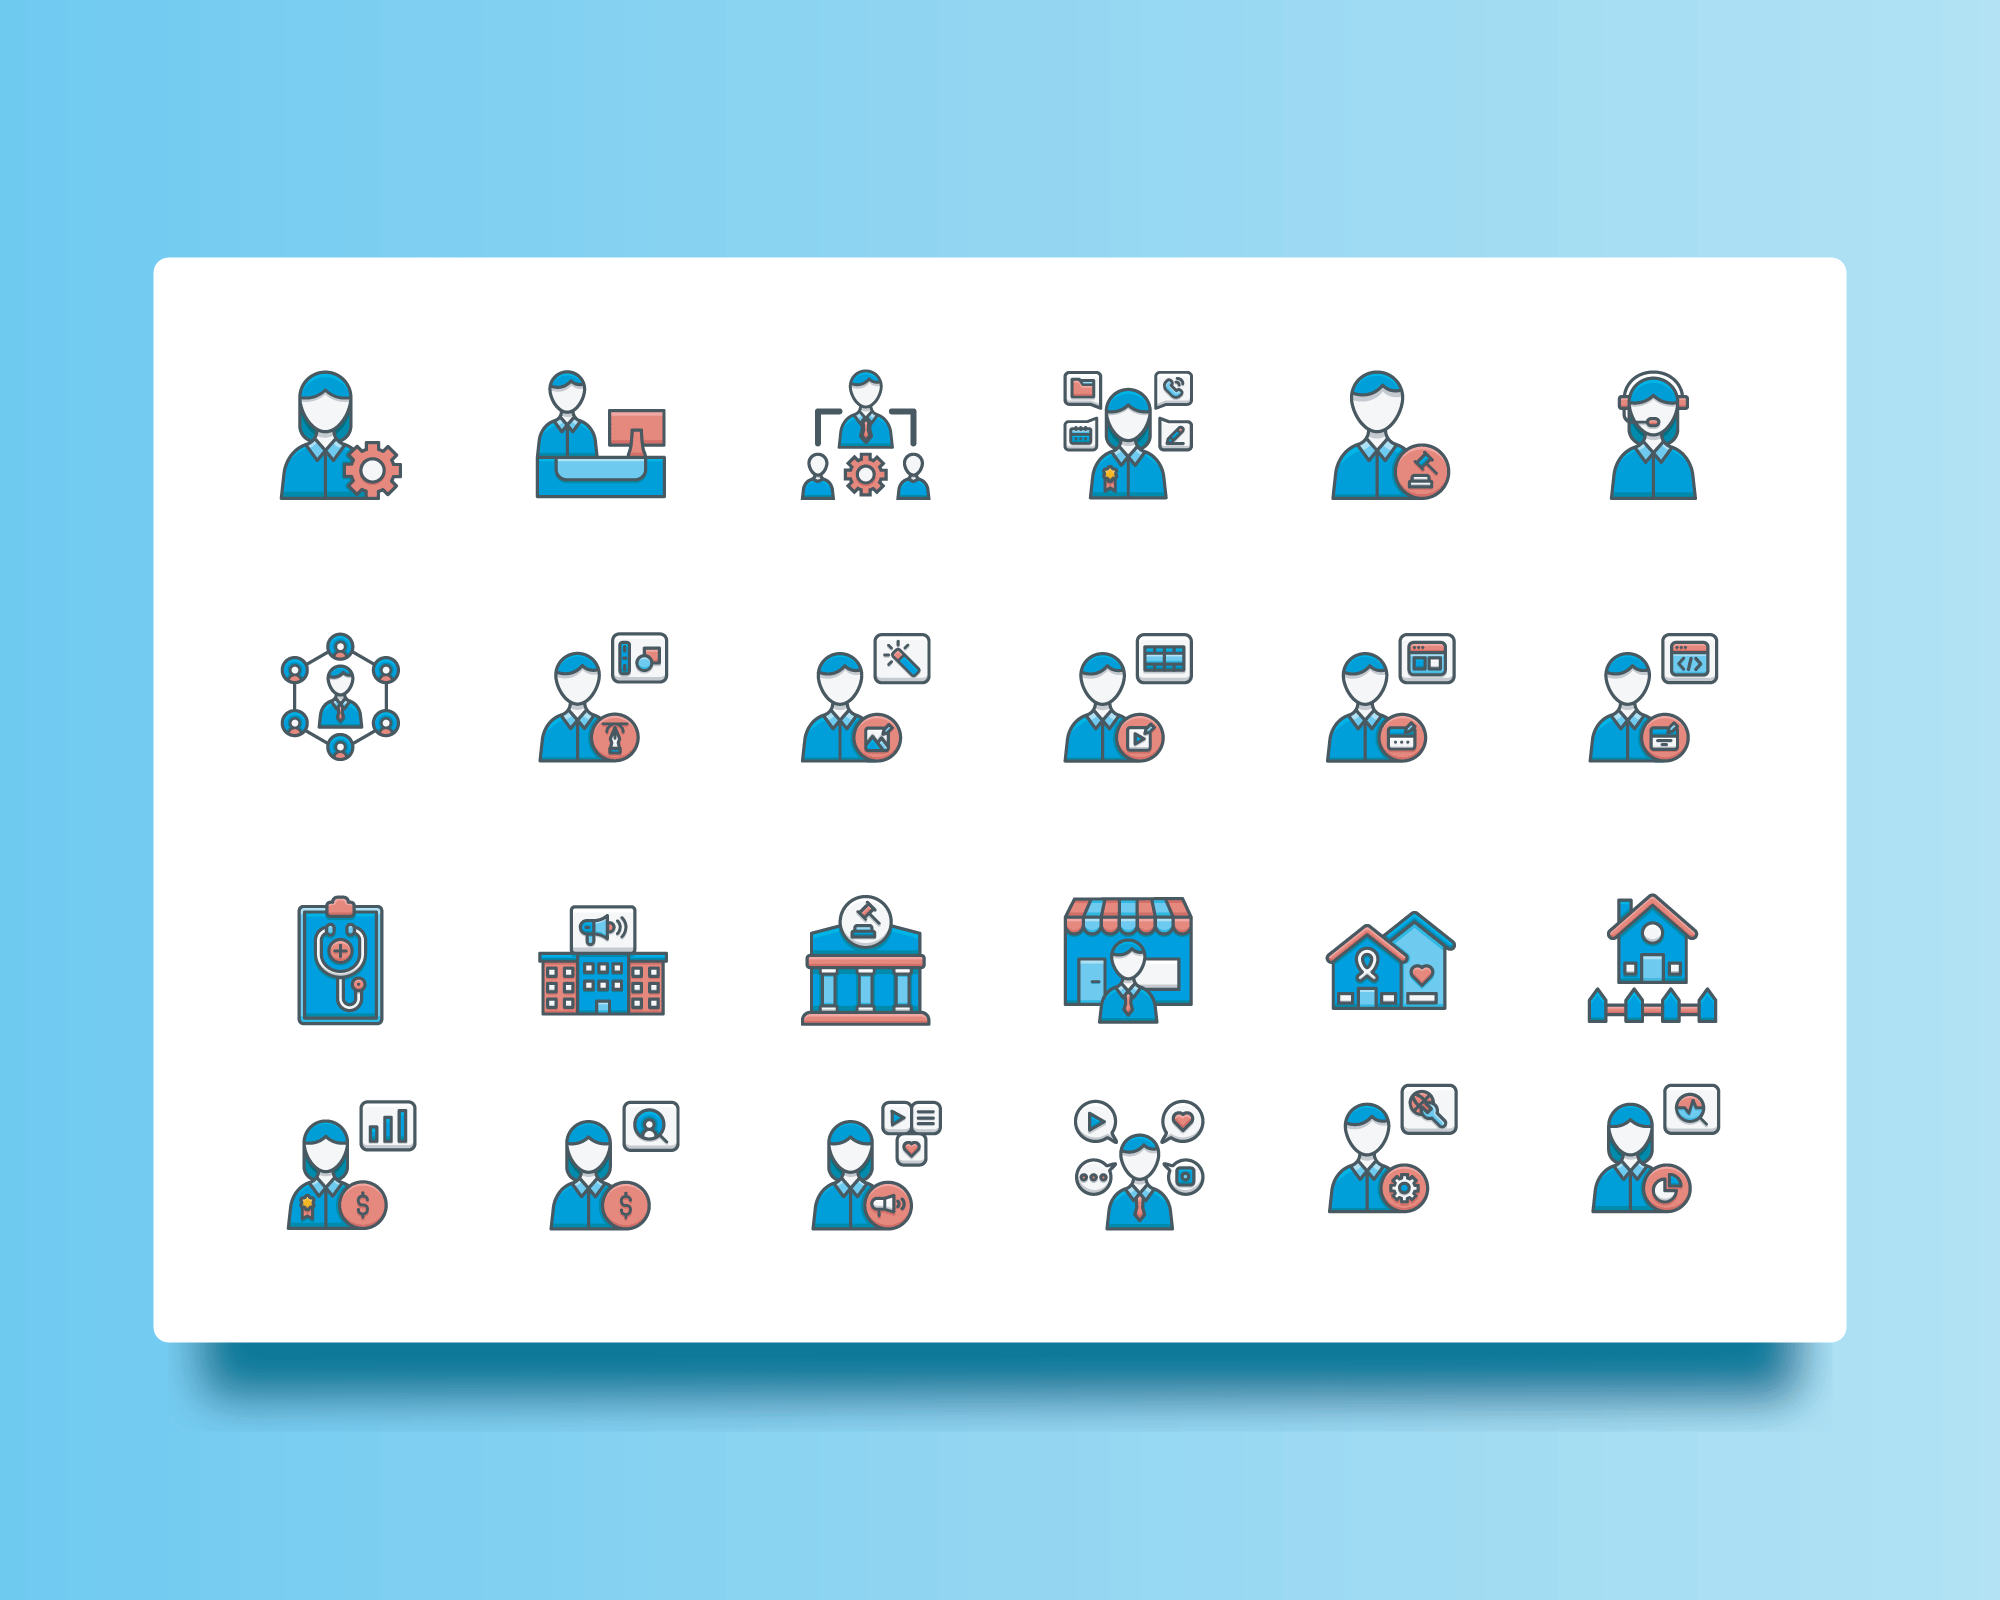 Icons set of a Costumer Service 2d icon costumer service design designer graphic design icon icon design icon designer icon social media icon ui icon ux icongraphy infography social media ui ux web website